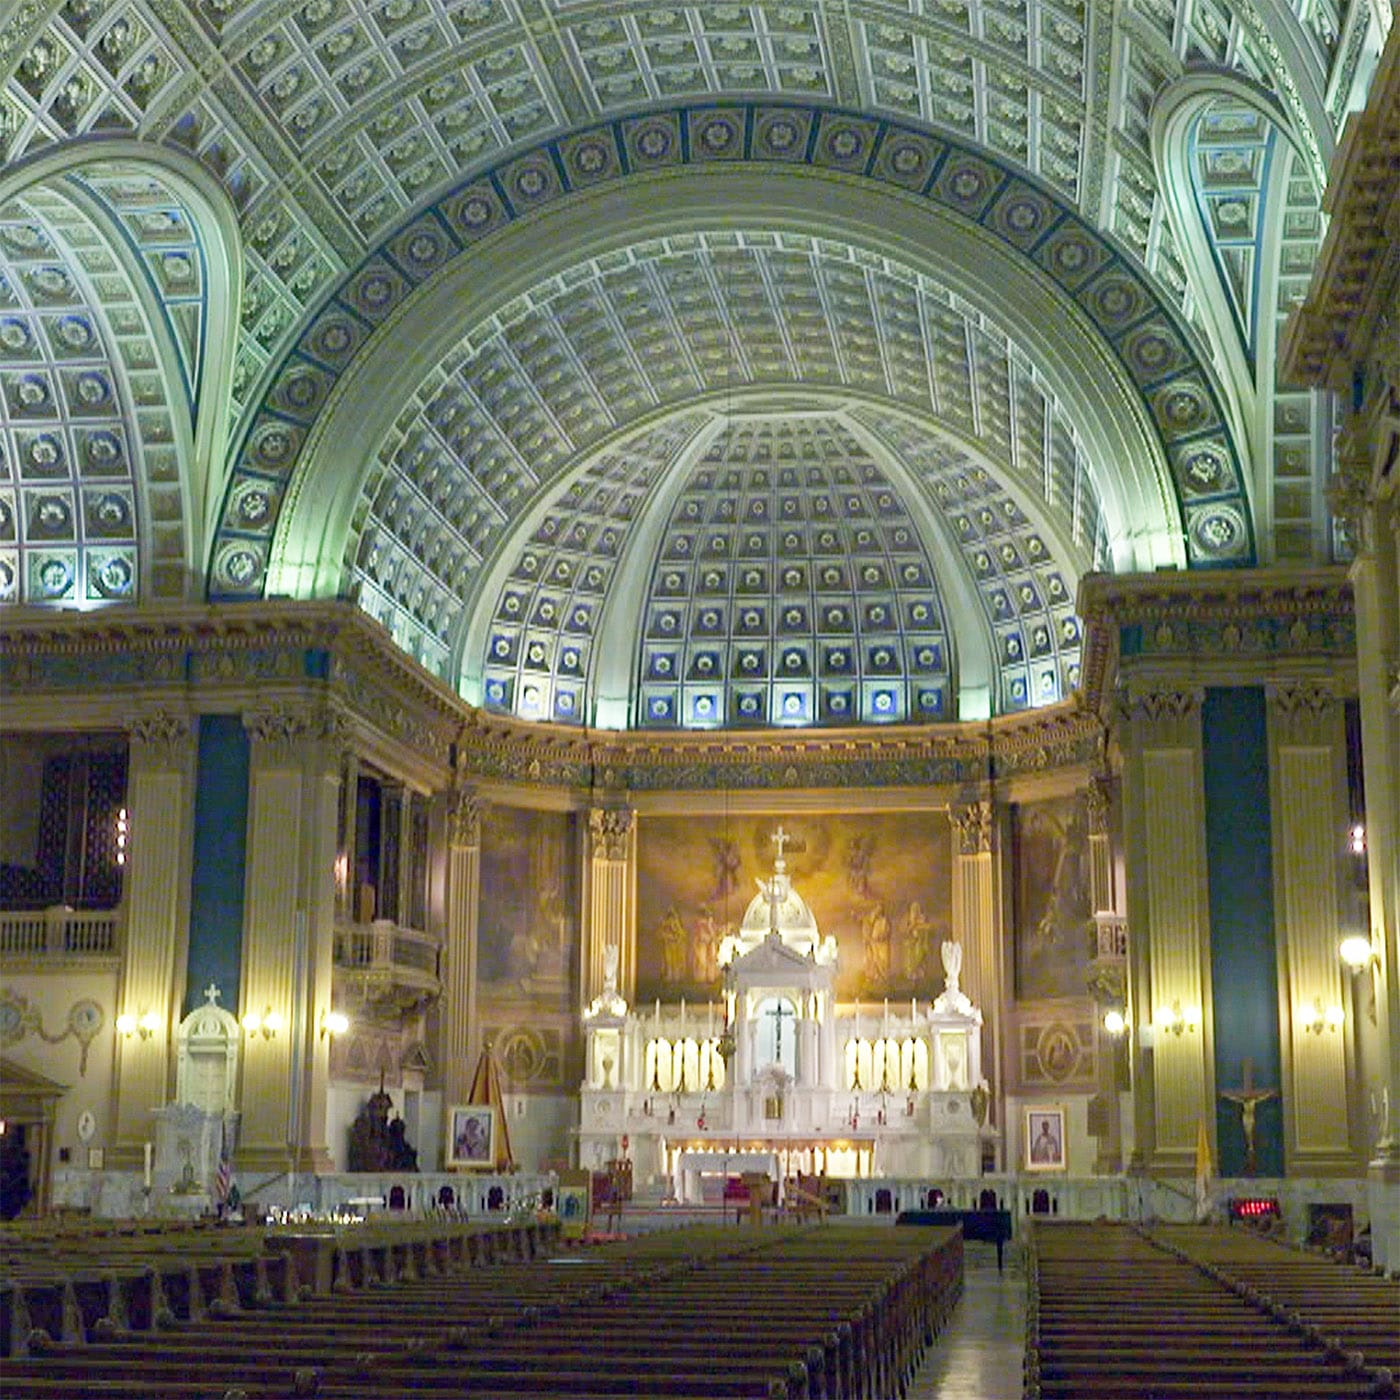 Our Lady of Sorrows Basilica